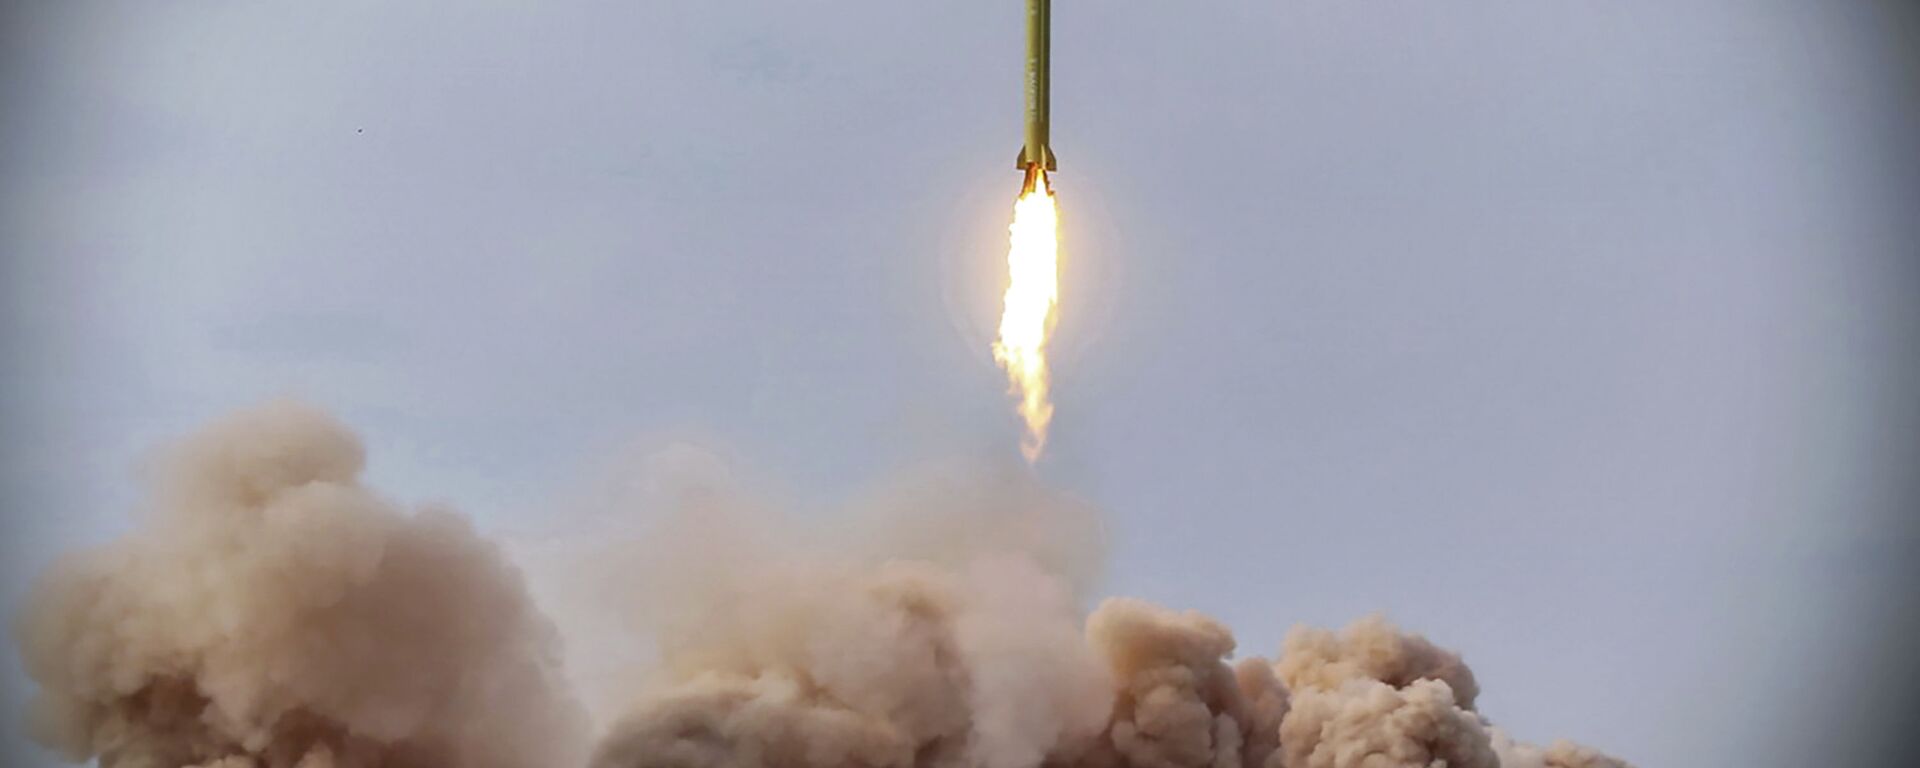 In this photo released on Saturday, Jan. 16, 2021, by the Iranian Revolutionary Guard, a missile is launched in a drill in Iran. Iran’s paramilitary Revolutionary Guard conducted a drill Saturday launching anti-warship ballistic missiles at a simulated target in the Indian Ocean, state television reported, amid heightened tensions over Tehran’s nuclear program and a U.S. pressure campaign against the Islamic Republic. - Sputnik International, 1920, 21.03.2021